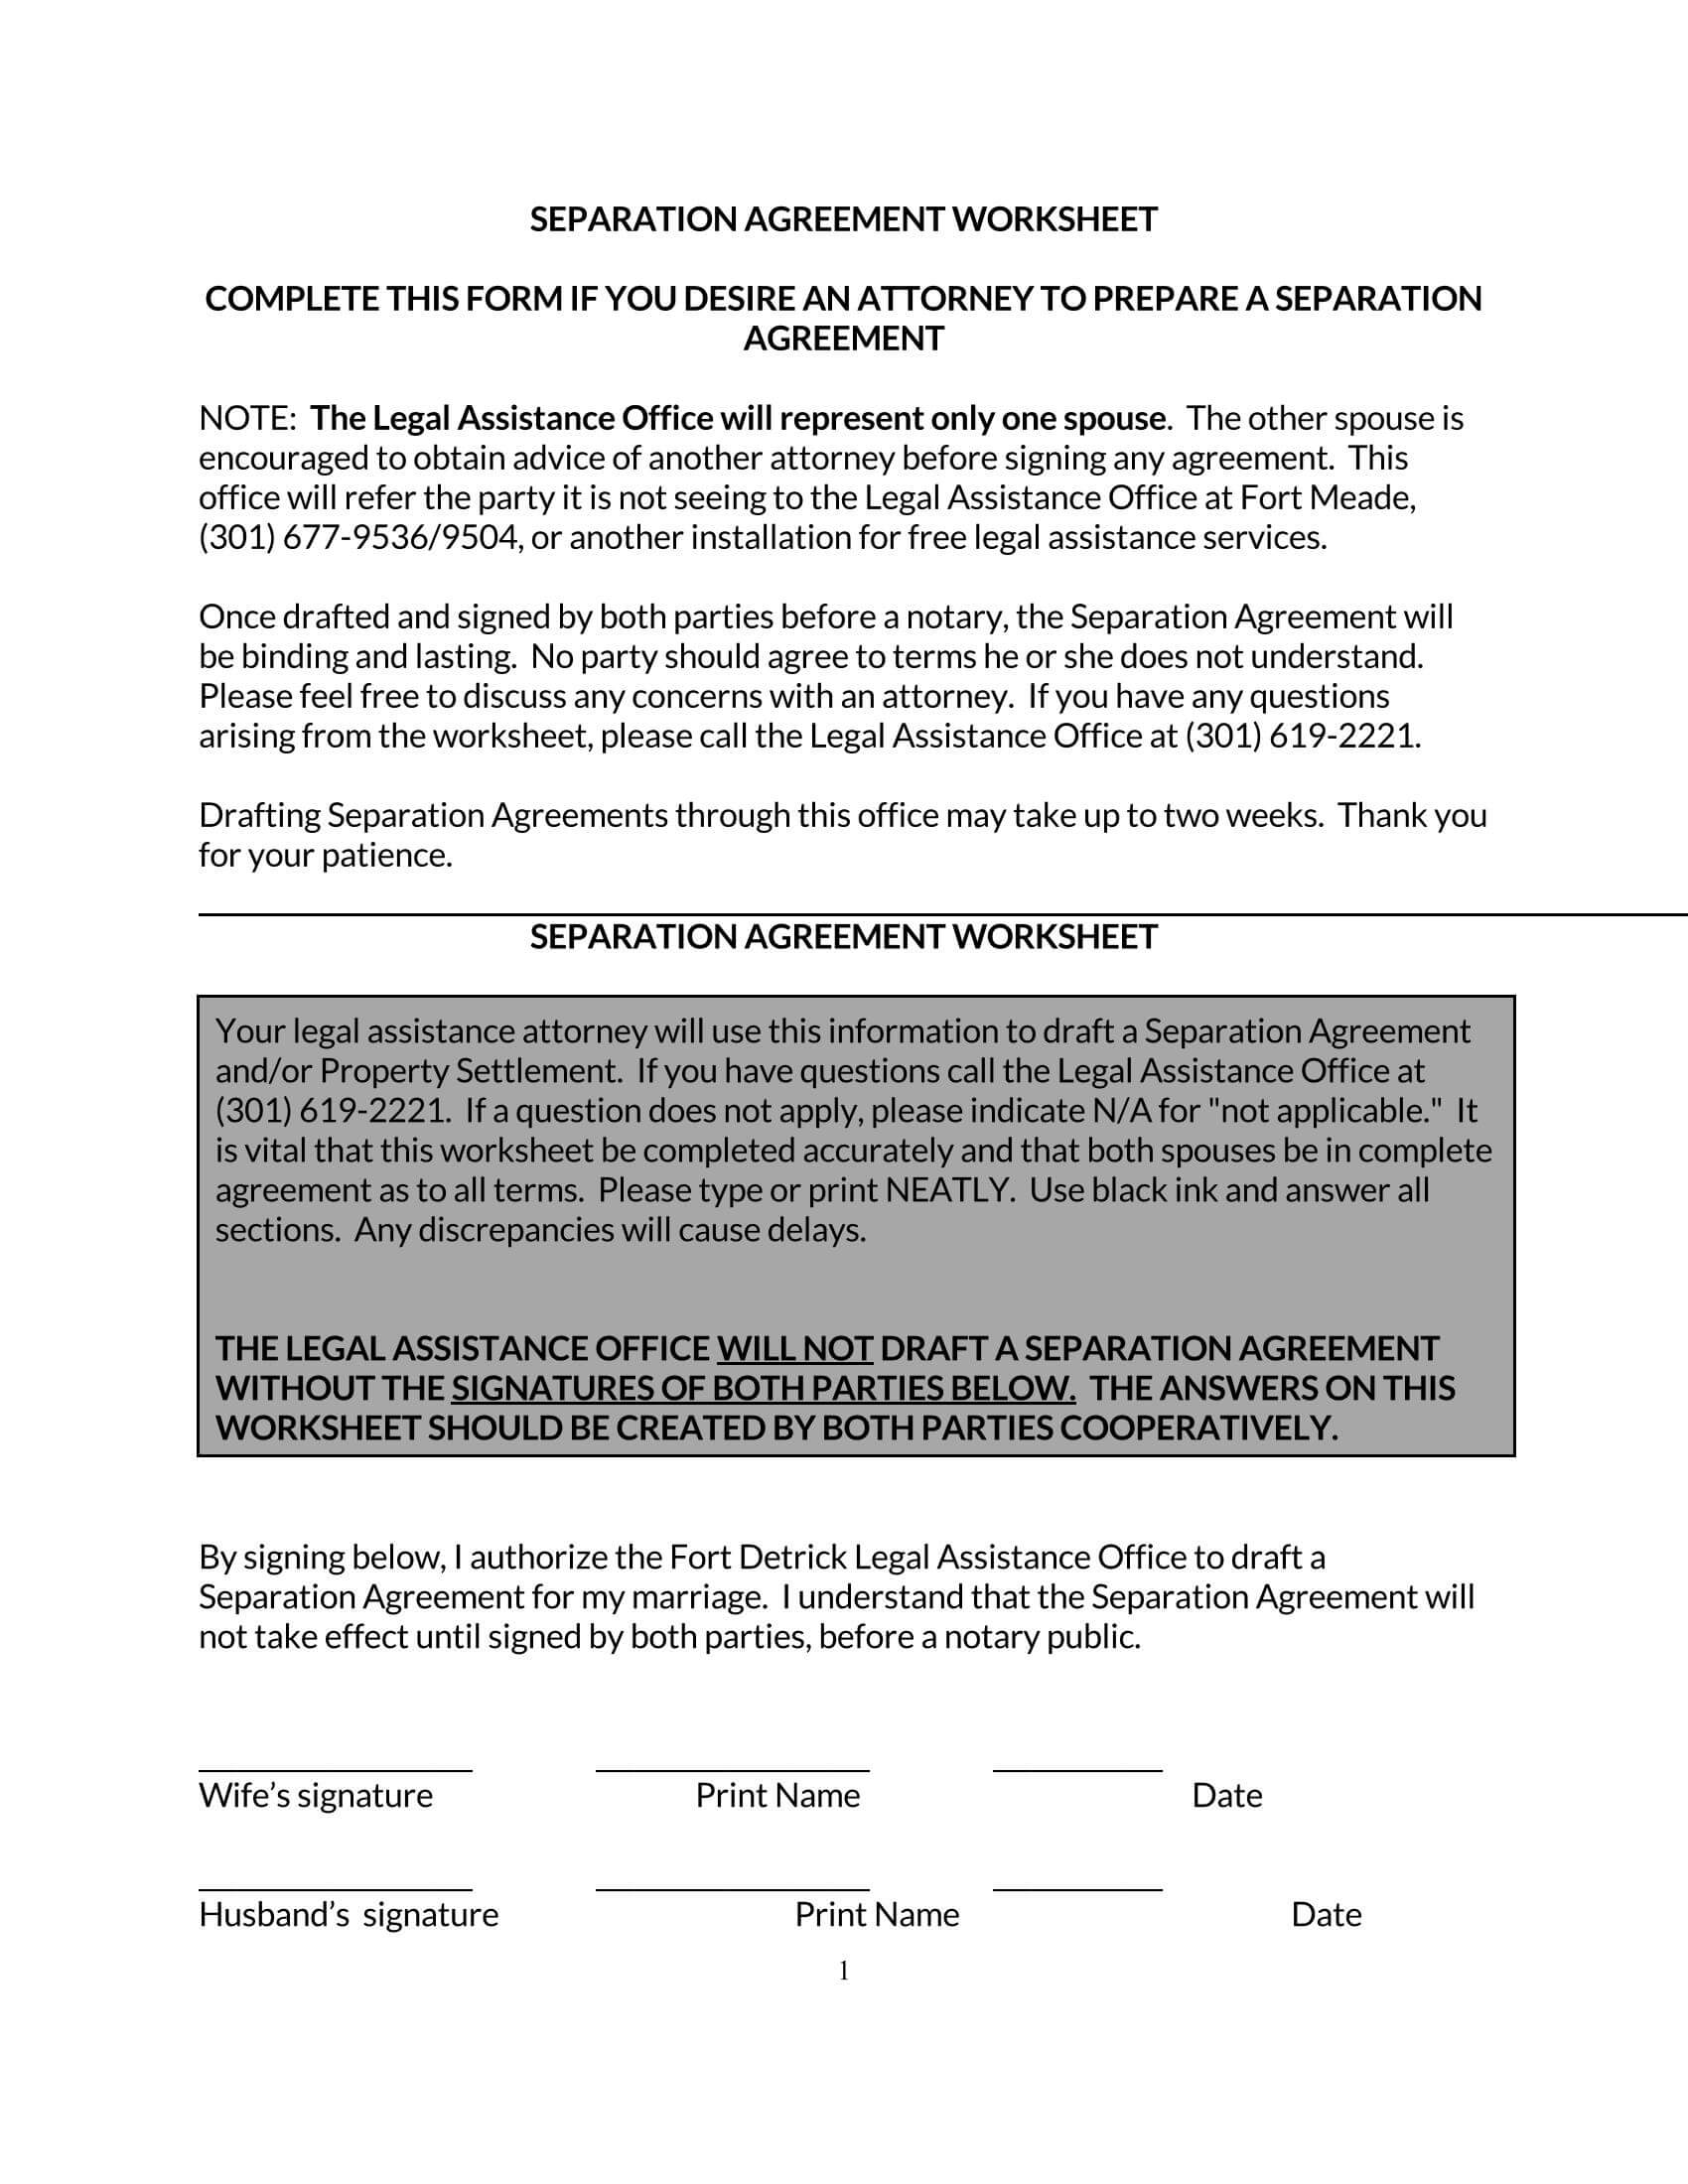 Separation agreement template in editable Word format 13